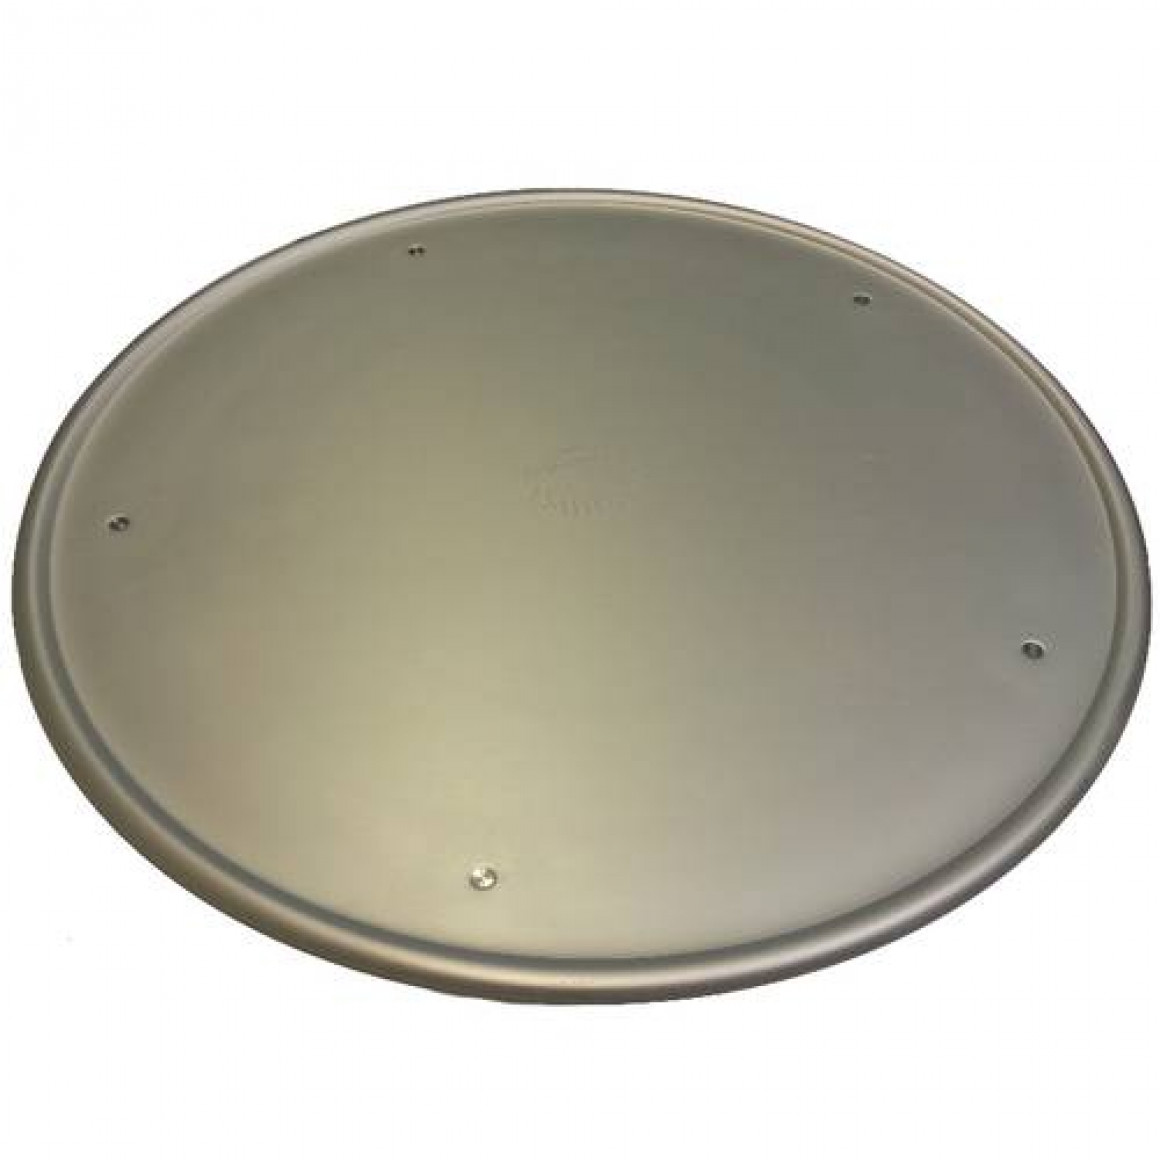 Pizza tray with rim and pvc